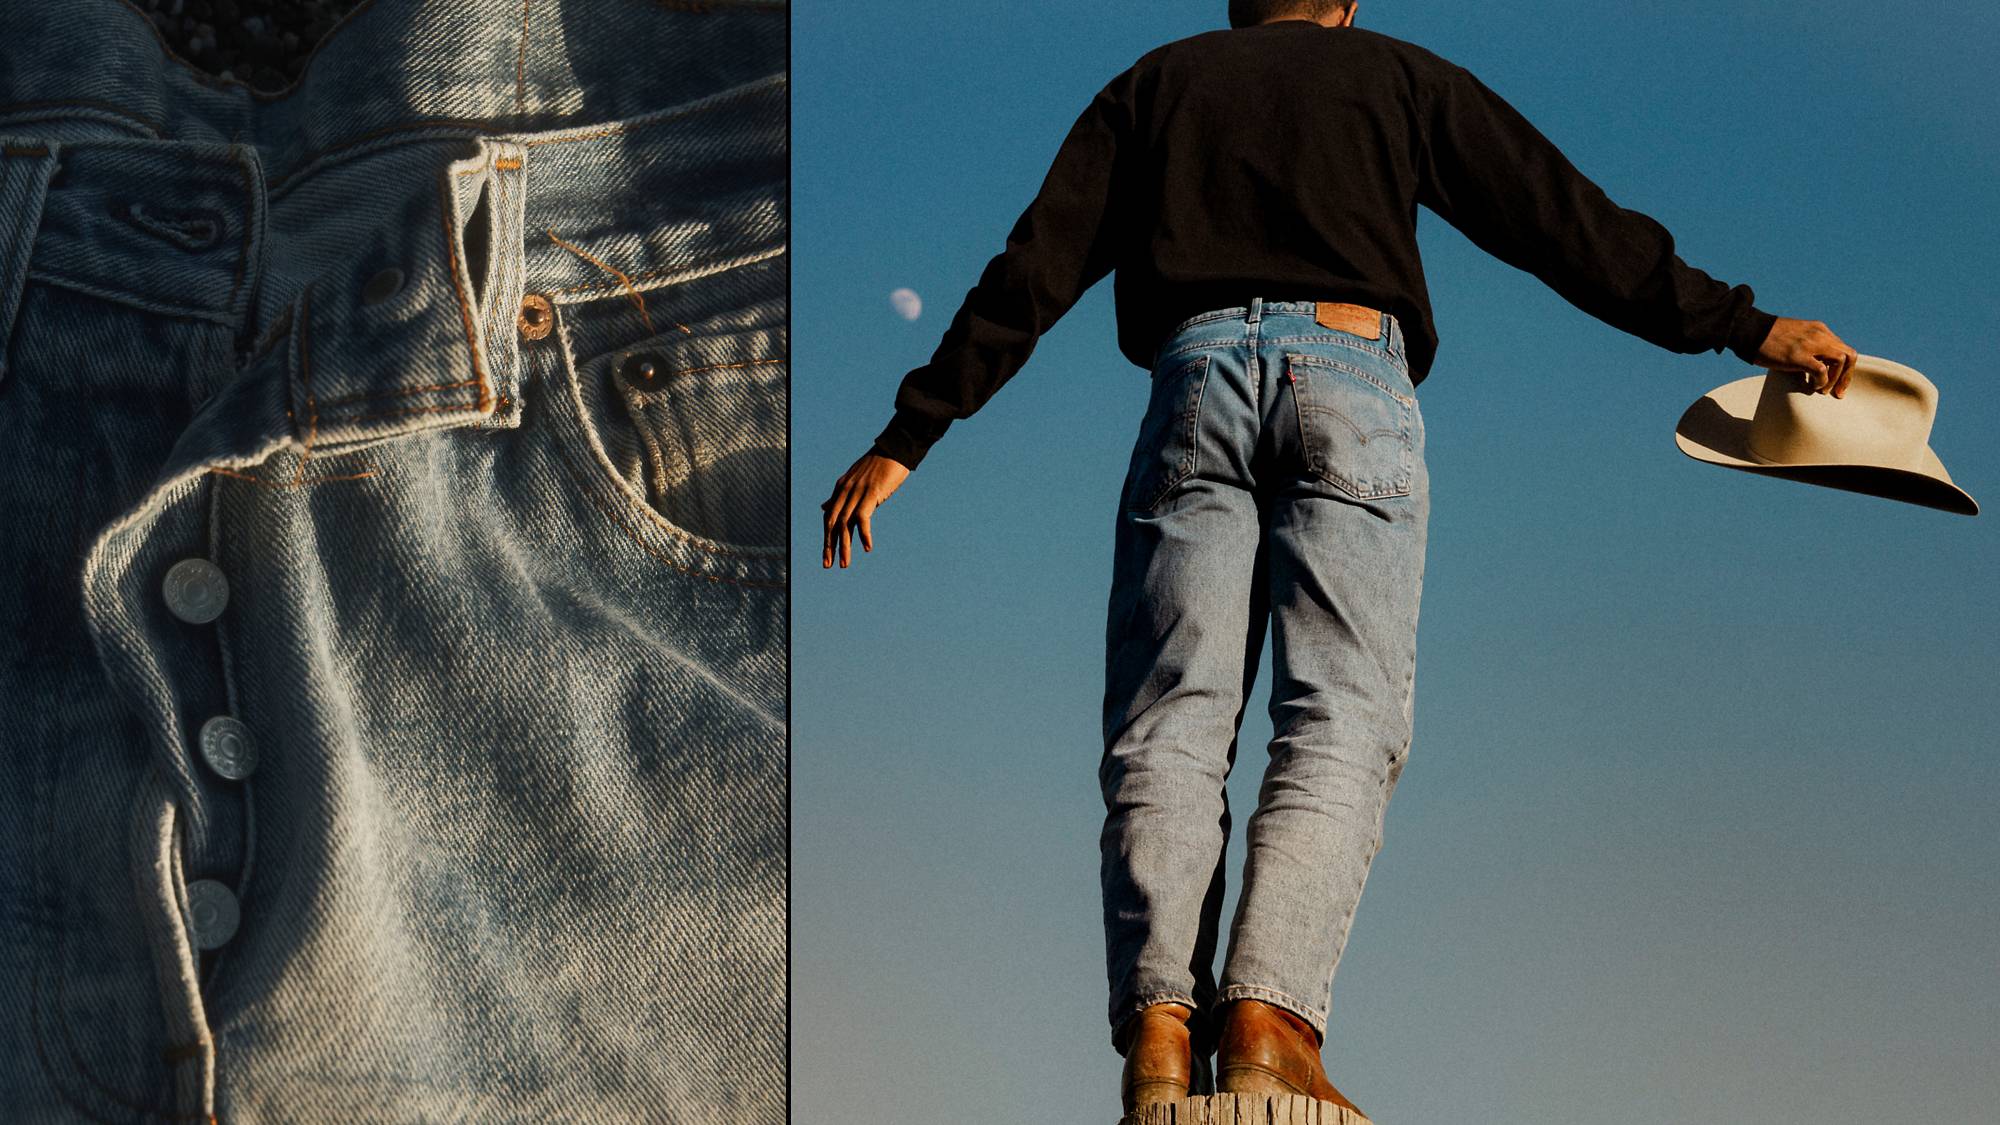 Find Your Perfect Fit with Levi's Men's Jeans Size Chart